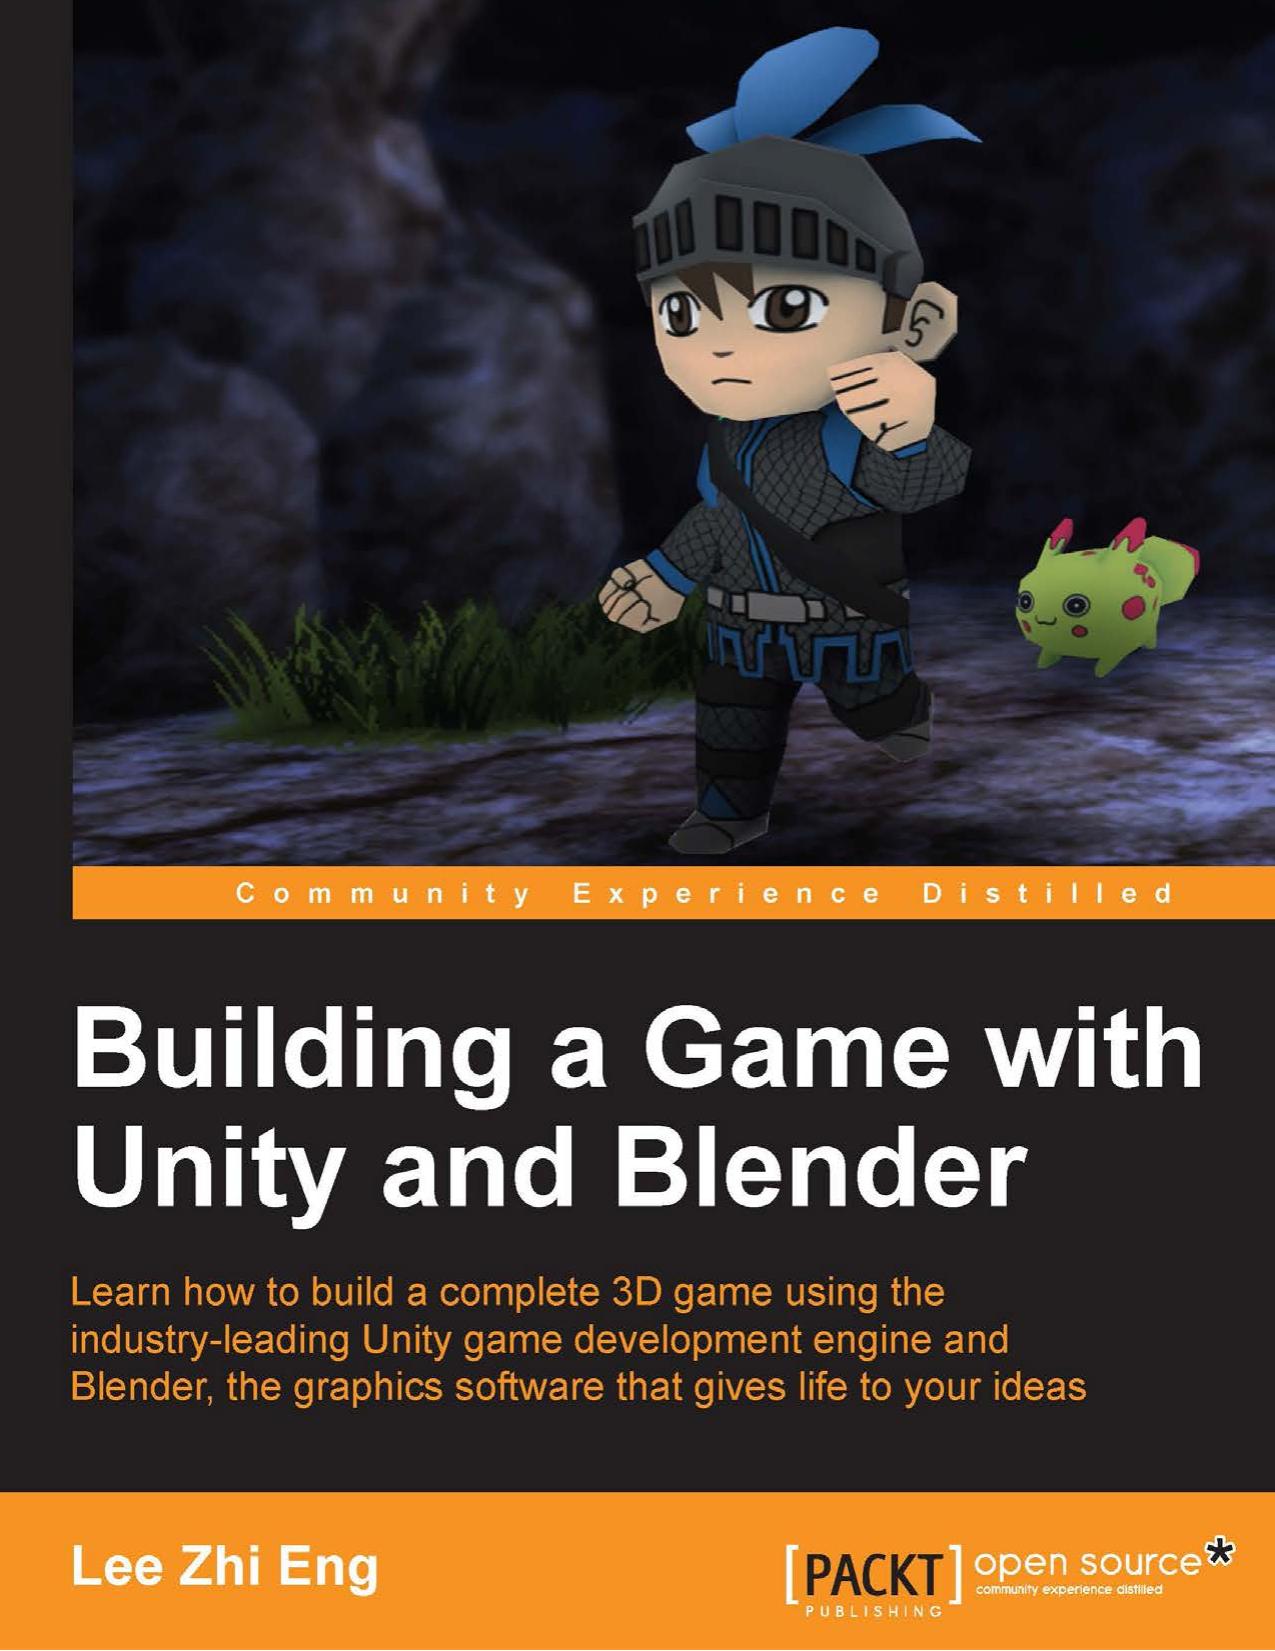 Building a Game with Unity and Blender by Lee Zhi Eng